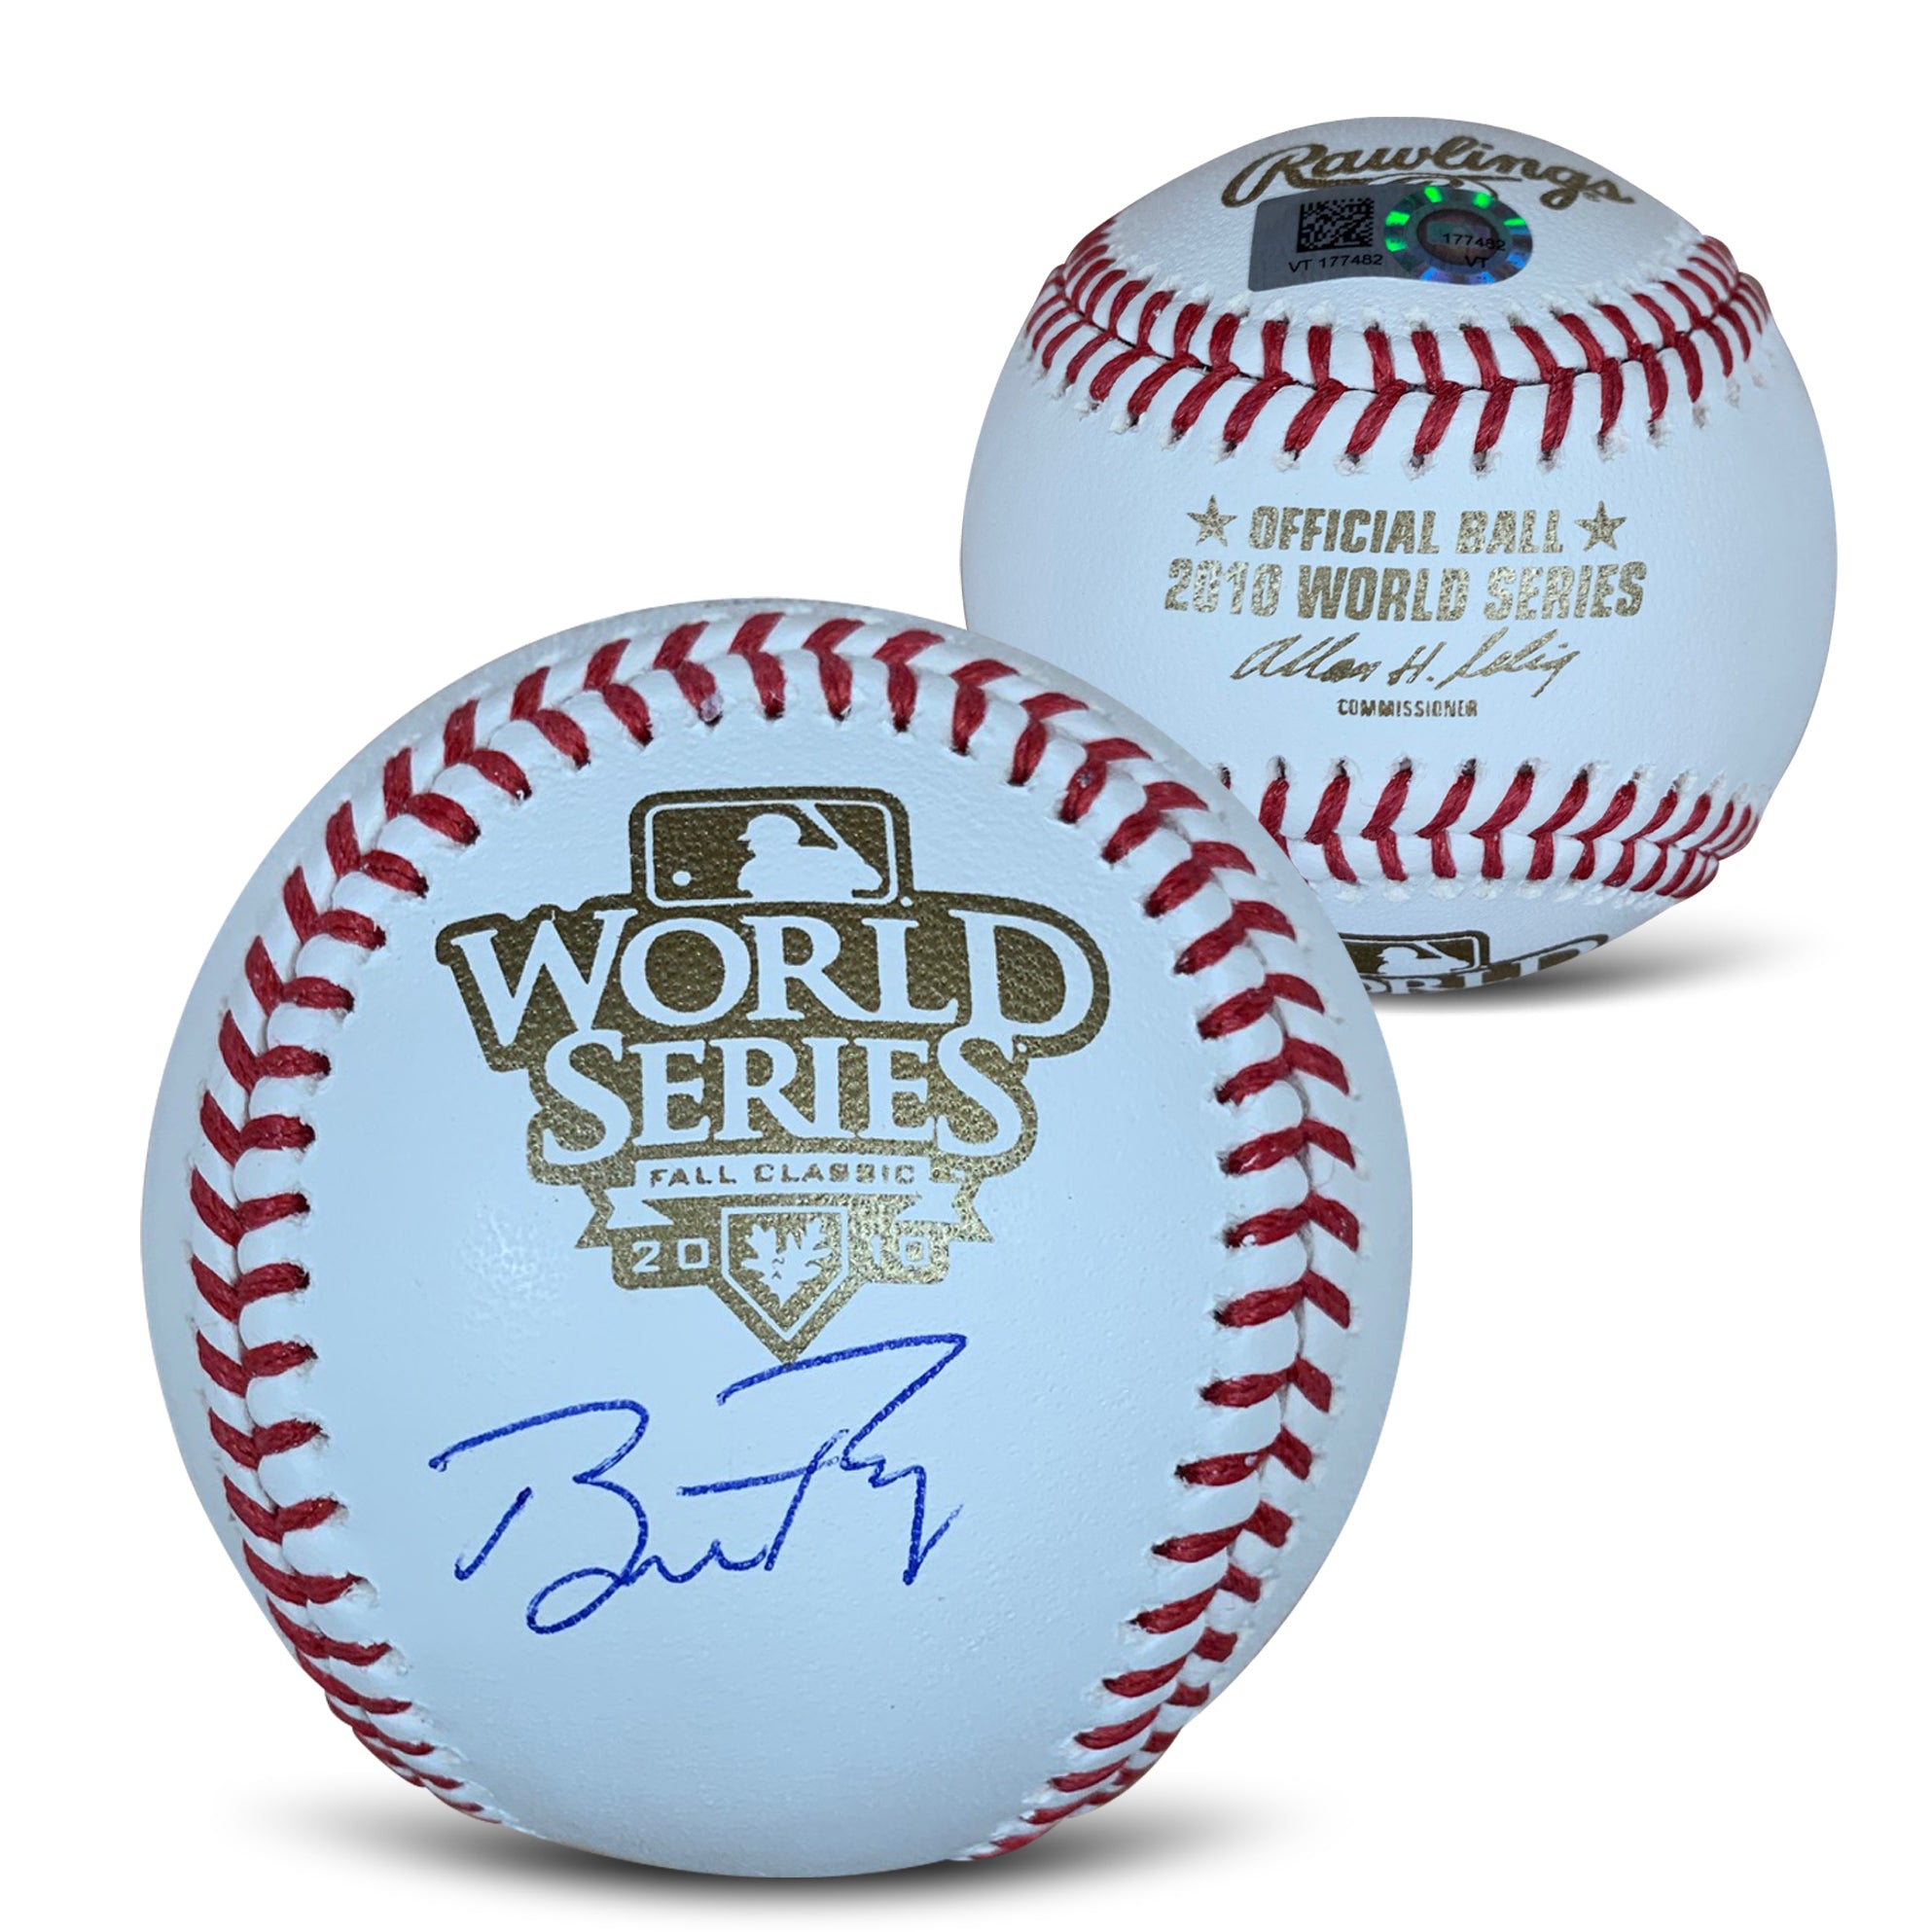 Buster Posey Autographed 2010 World Series Signed Baseball MLB Authent